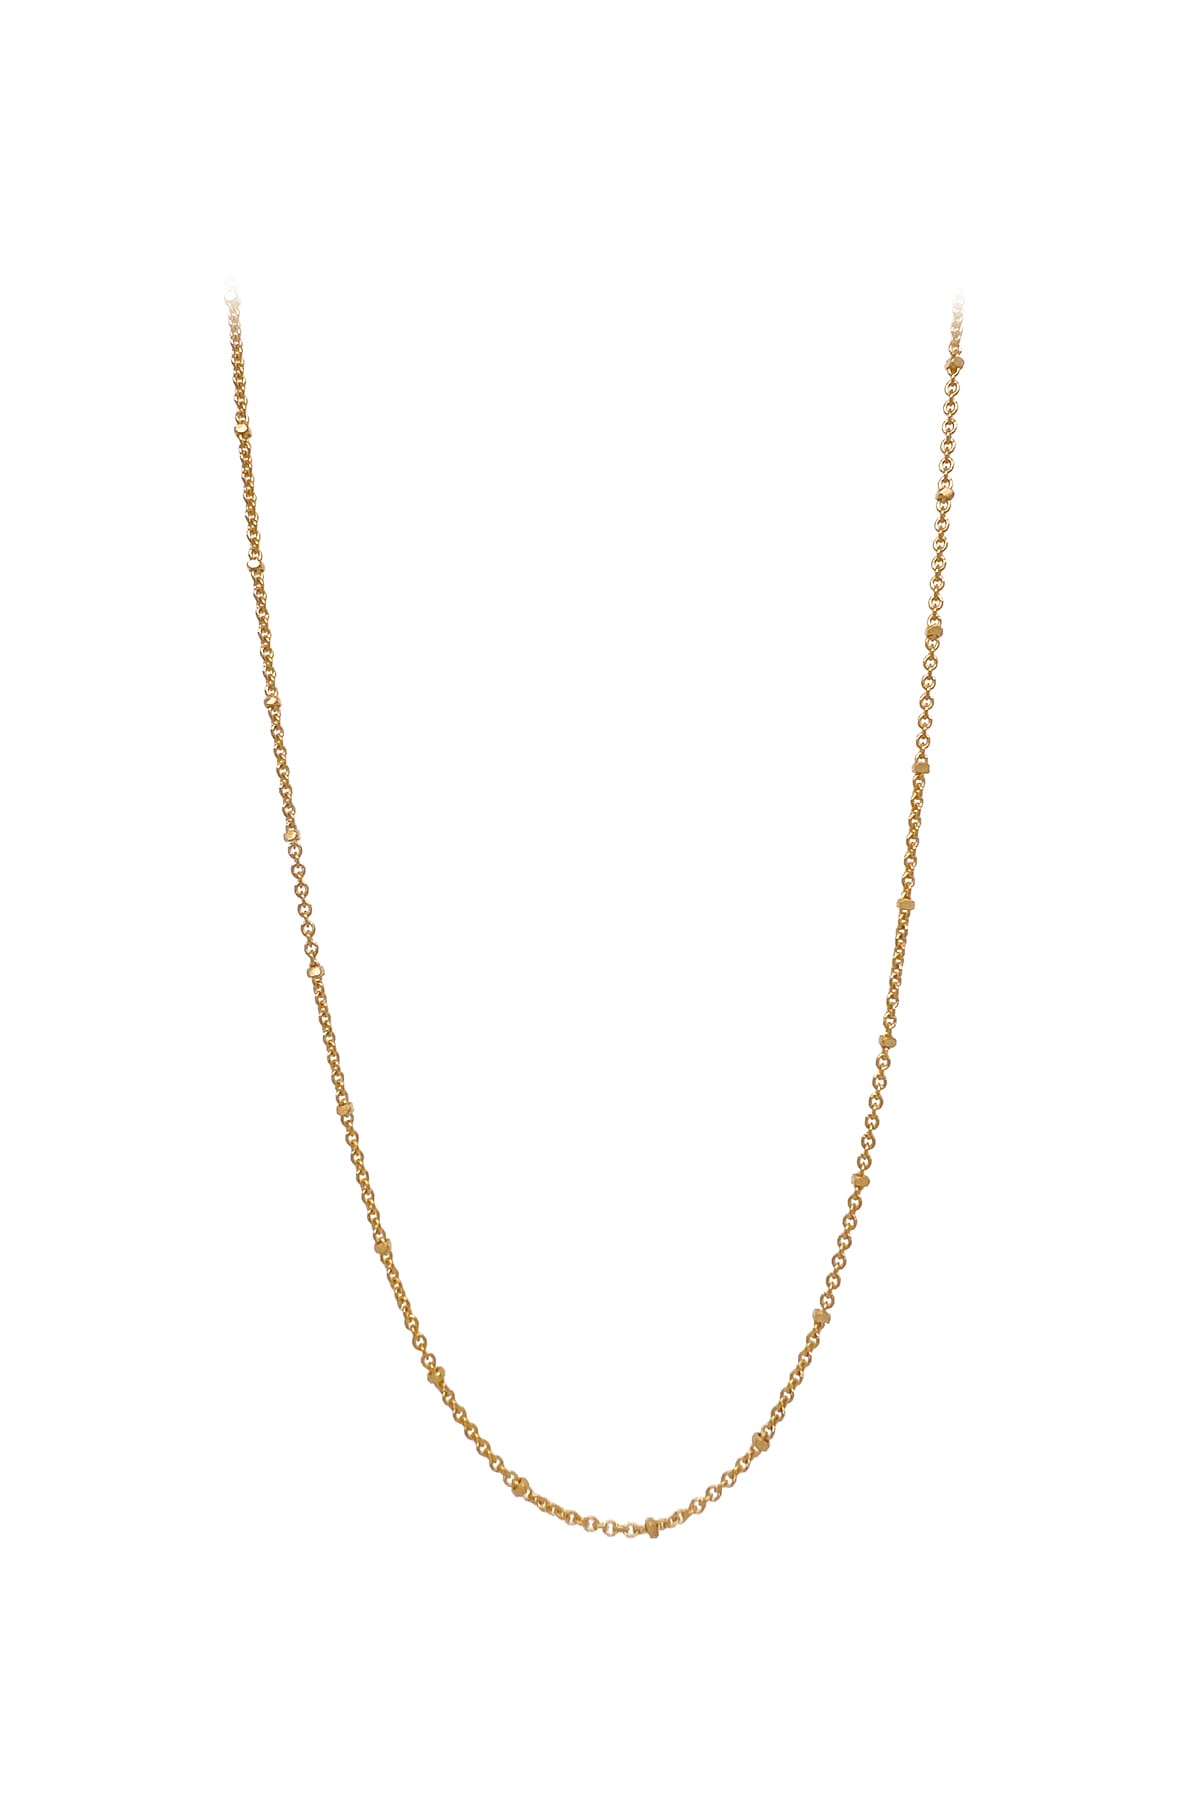 9 Carat Yellow Gold 50cm Tight Cable Square Ball Chain available at LeGassick Diamonds and Jewellery Gold Coast, Australia.